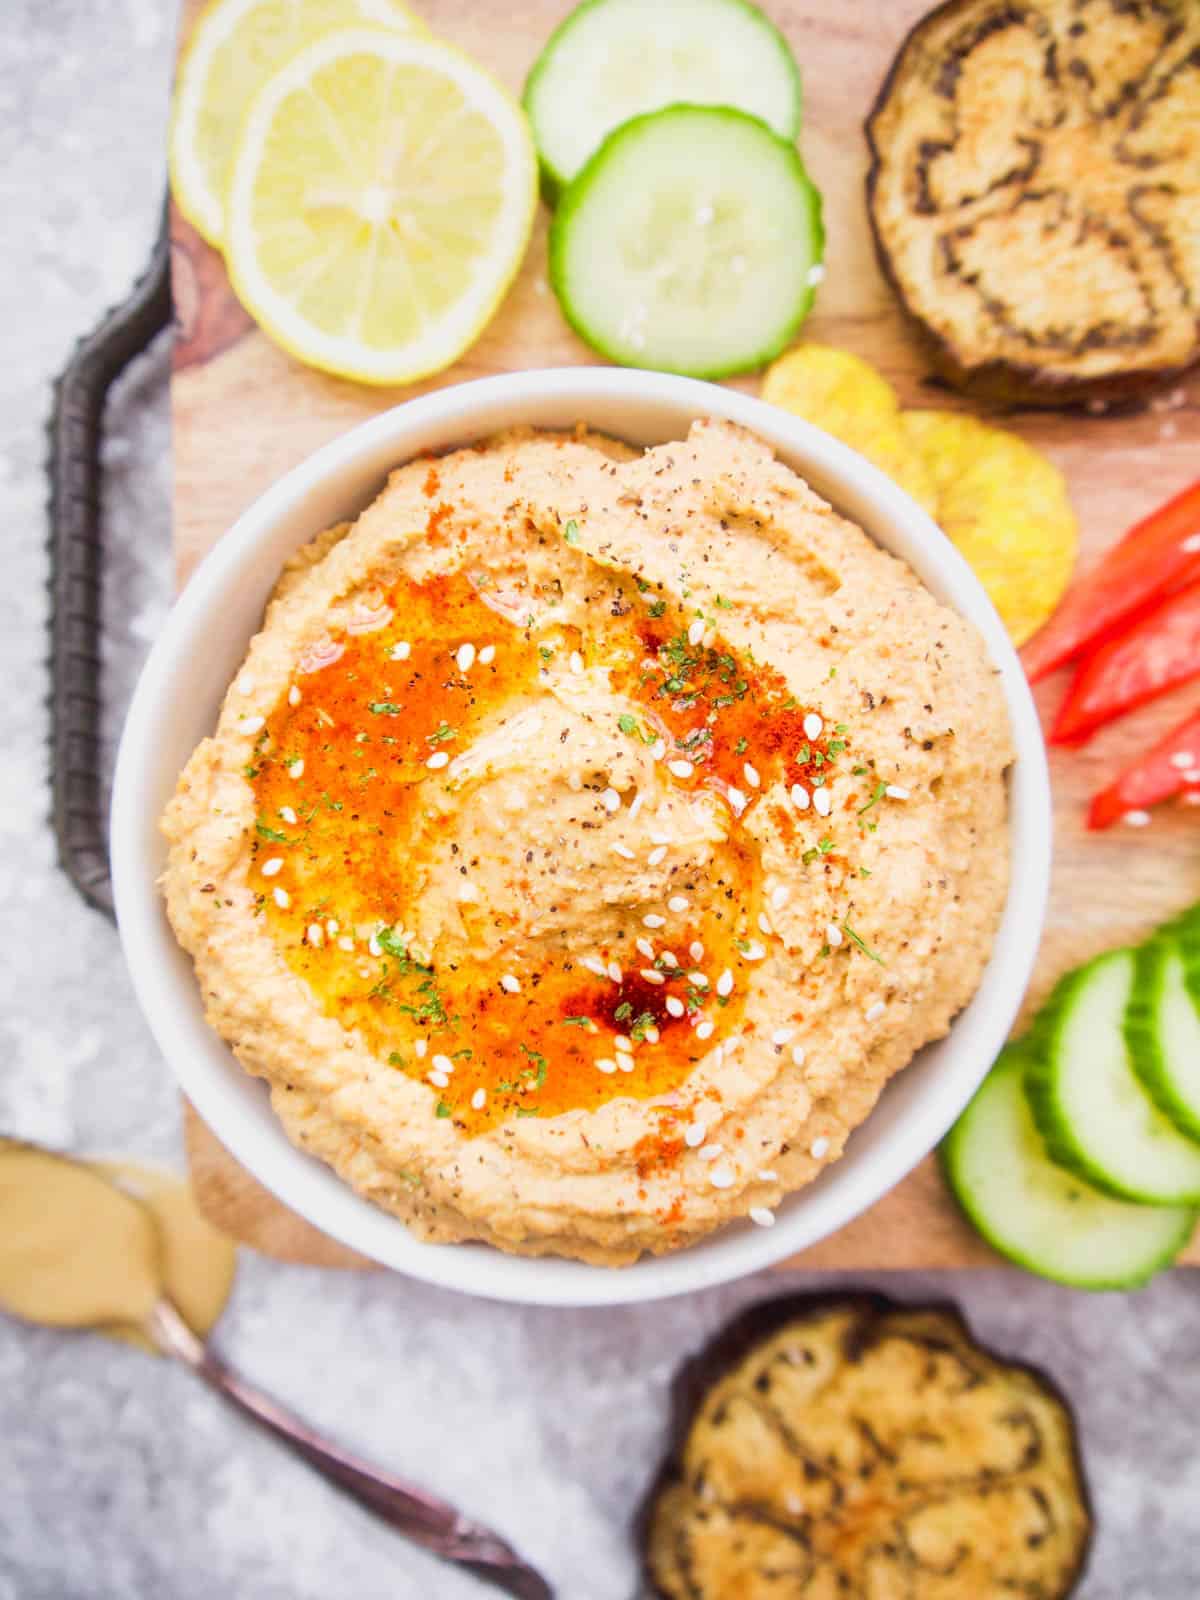 Cauliflower hummus in a bowl with roasted eggplant and peppers inside.